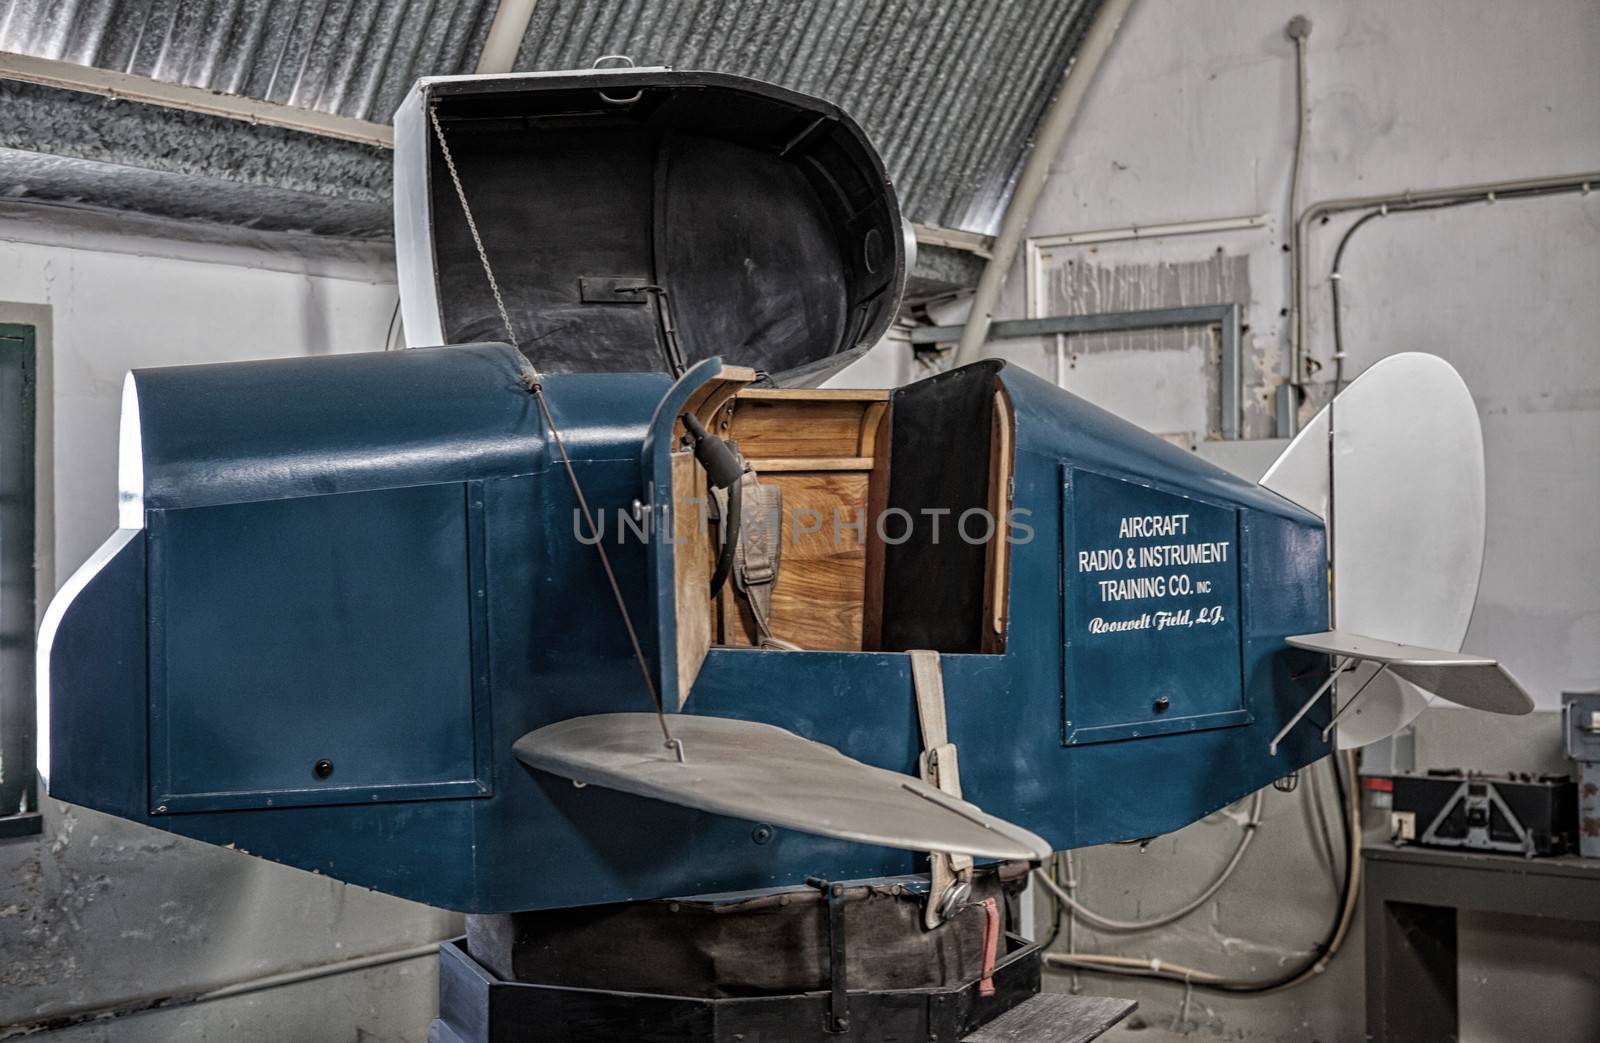 The world's first ever flight simulator, used by trainee pilots during World War 2.